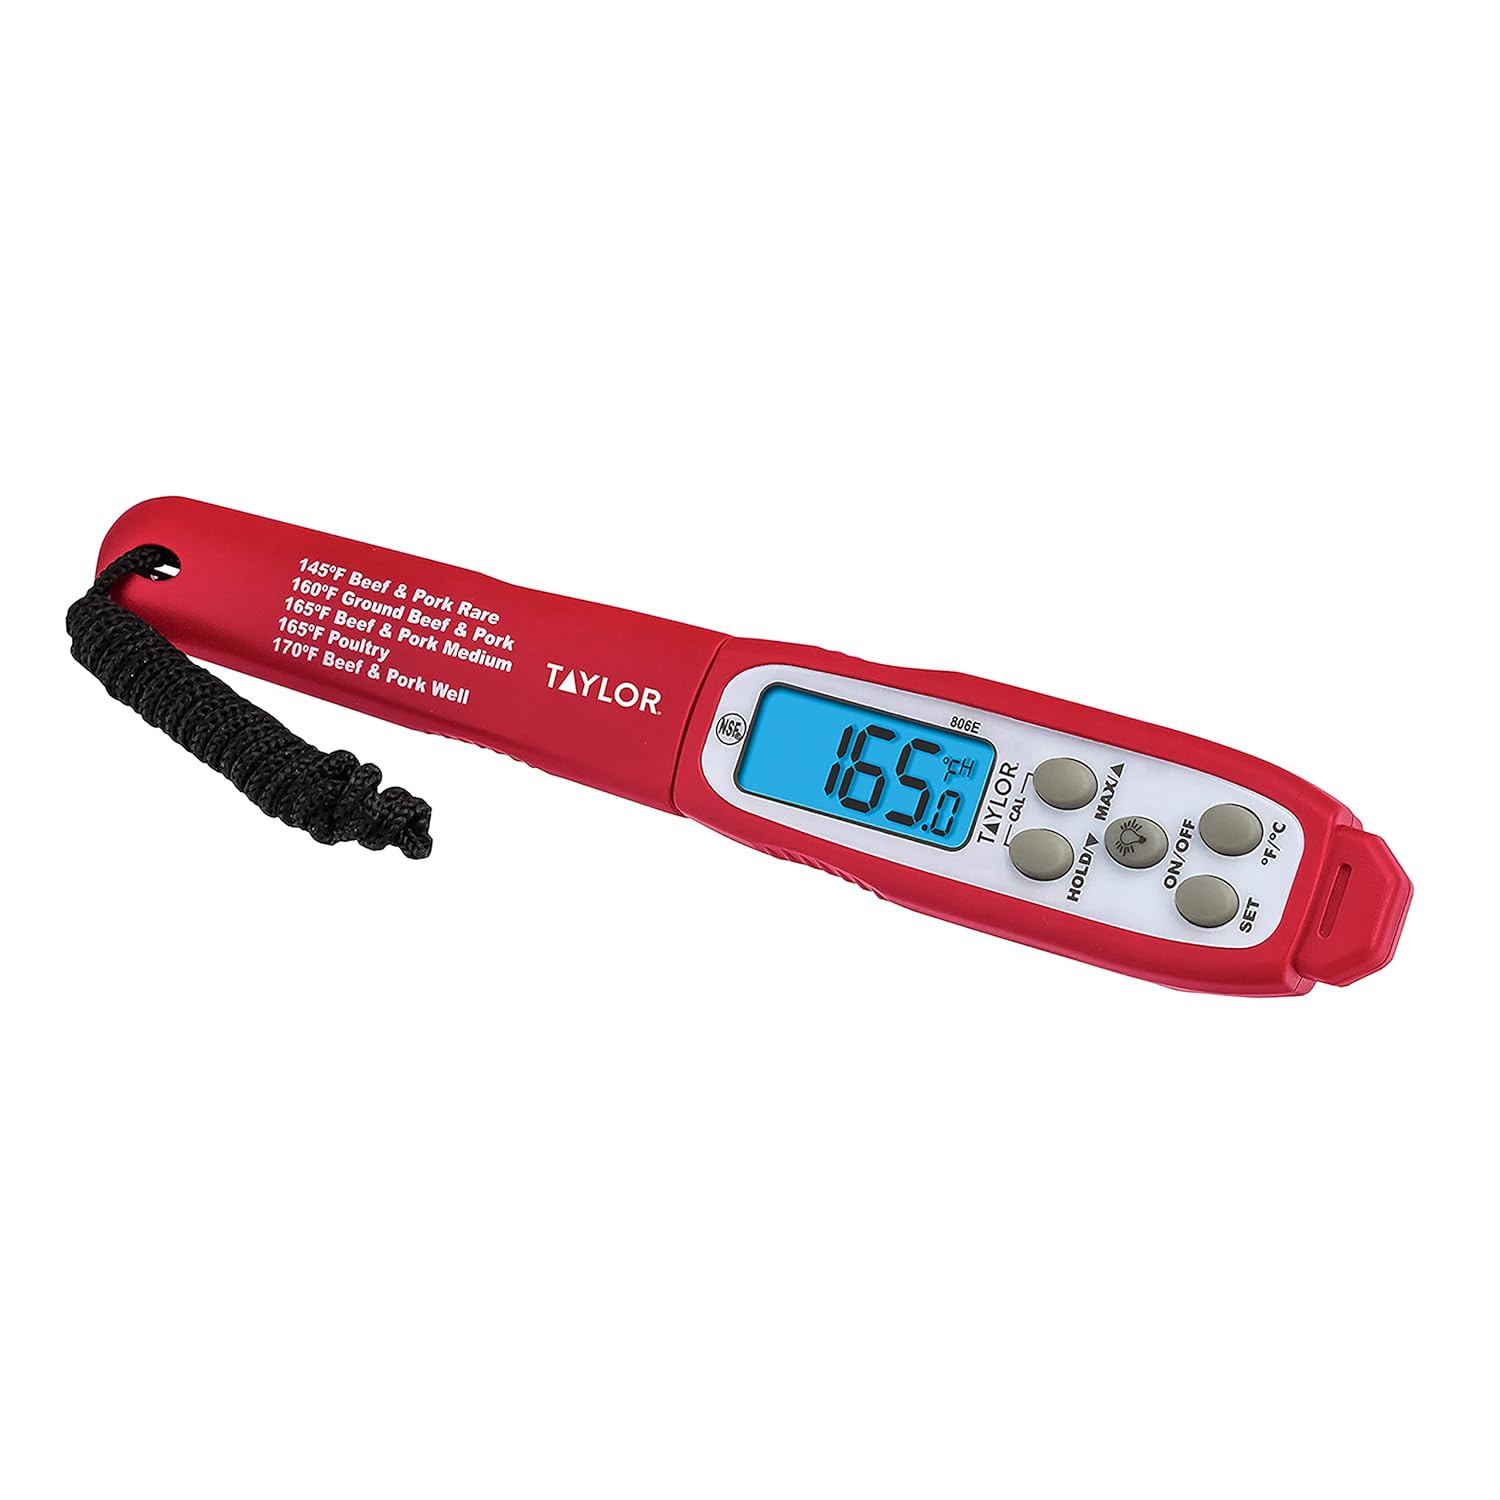 Taylor 9847 Waterproof Digital Instant Read Meat Food Grill BBQ Kitchen Cooking Thermometer, Comes with Sleeve Extender and Lanyard